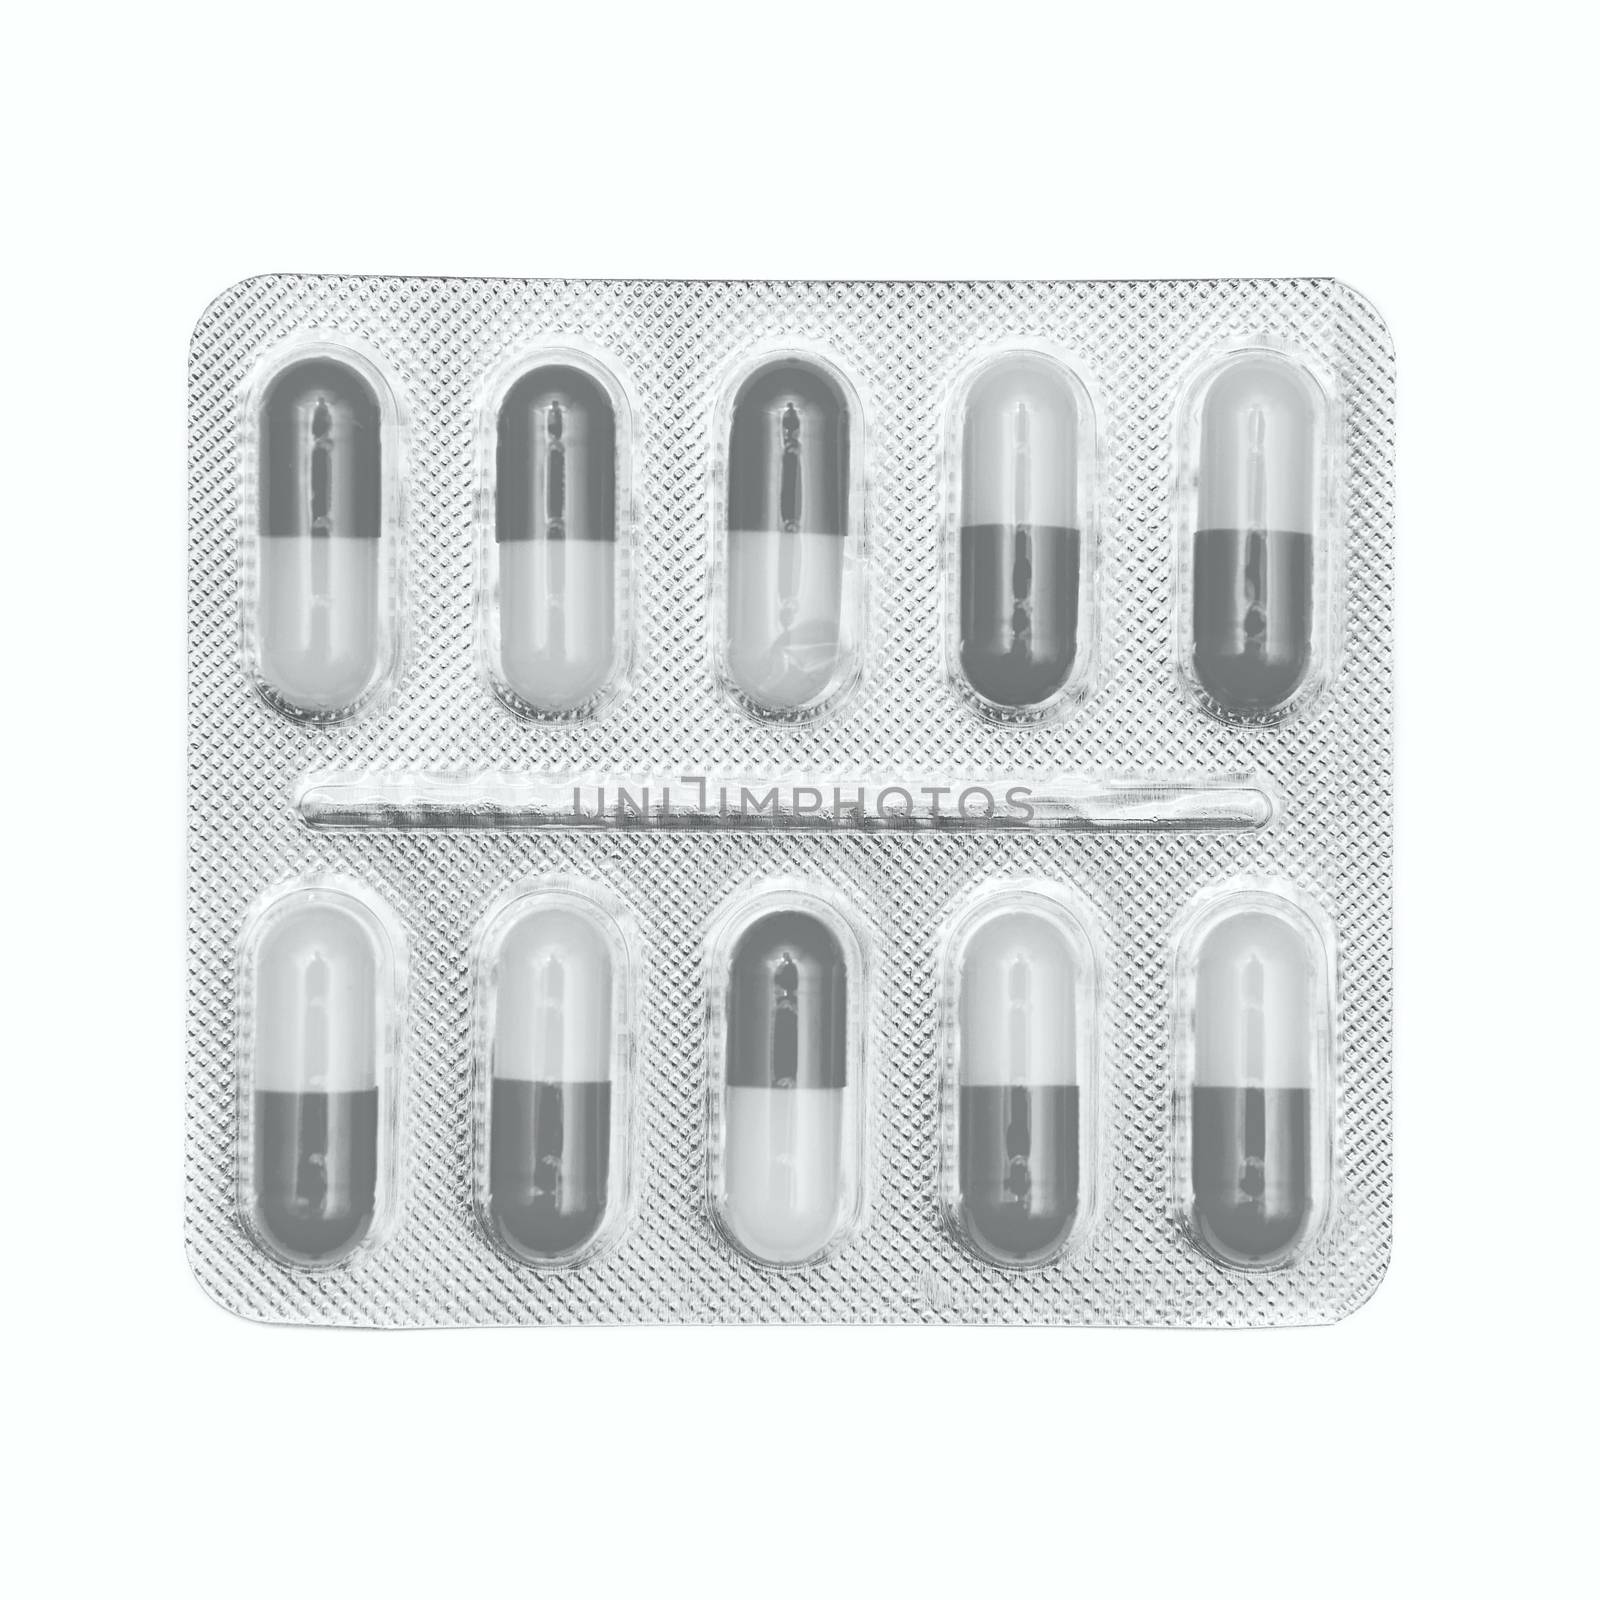 Blister pack of gray and white capsules isolated on white background.